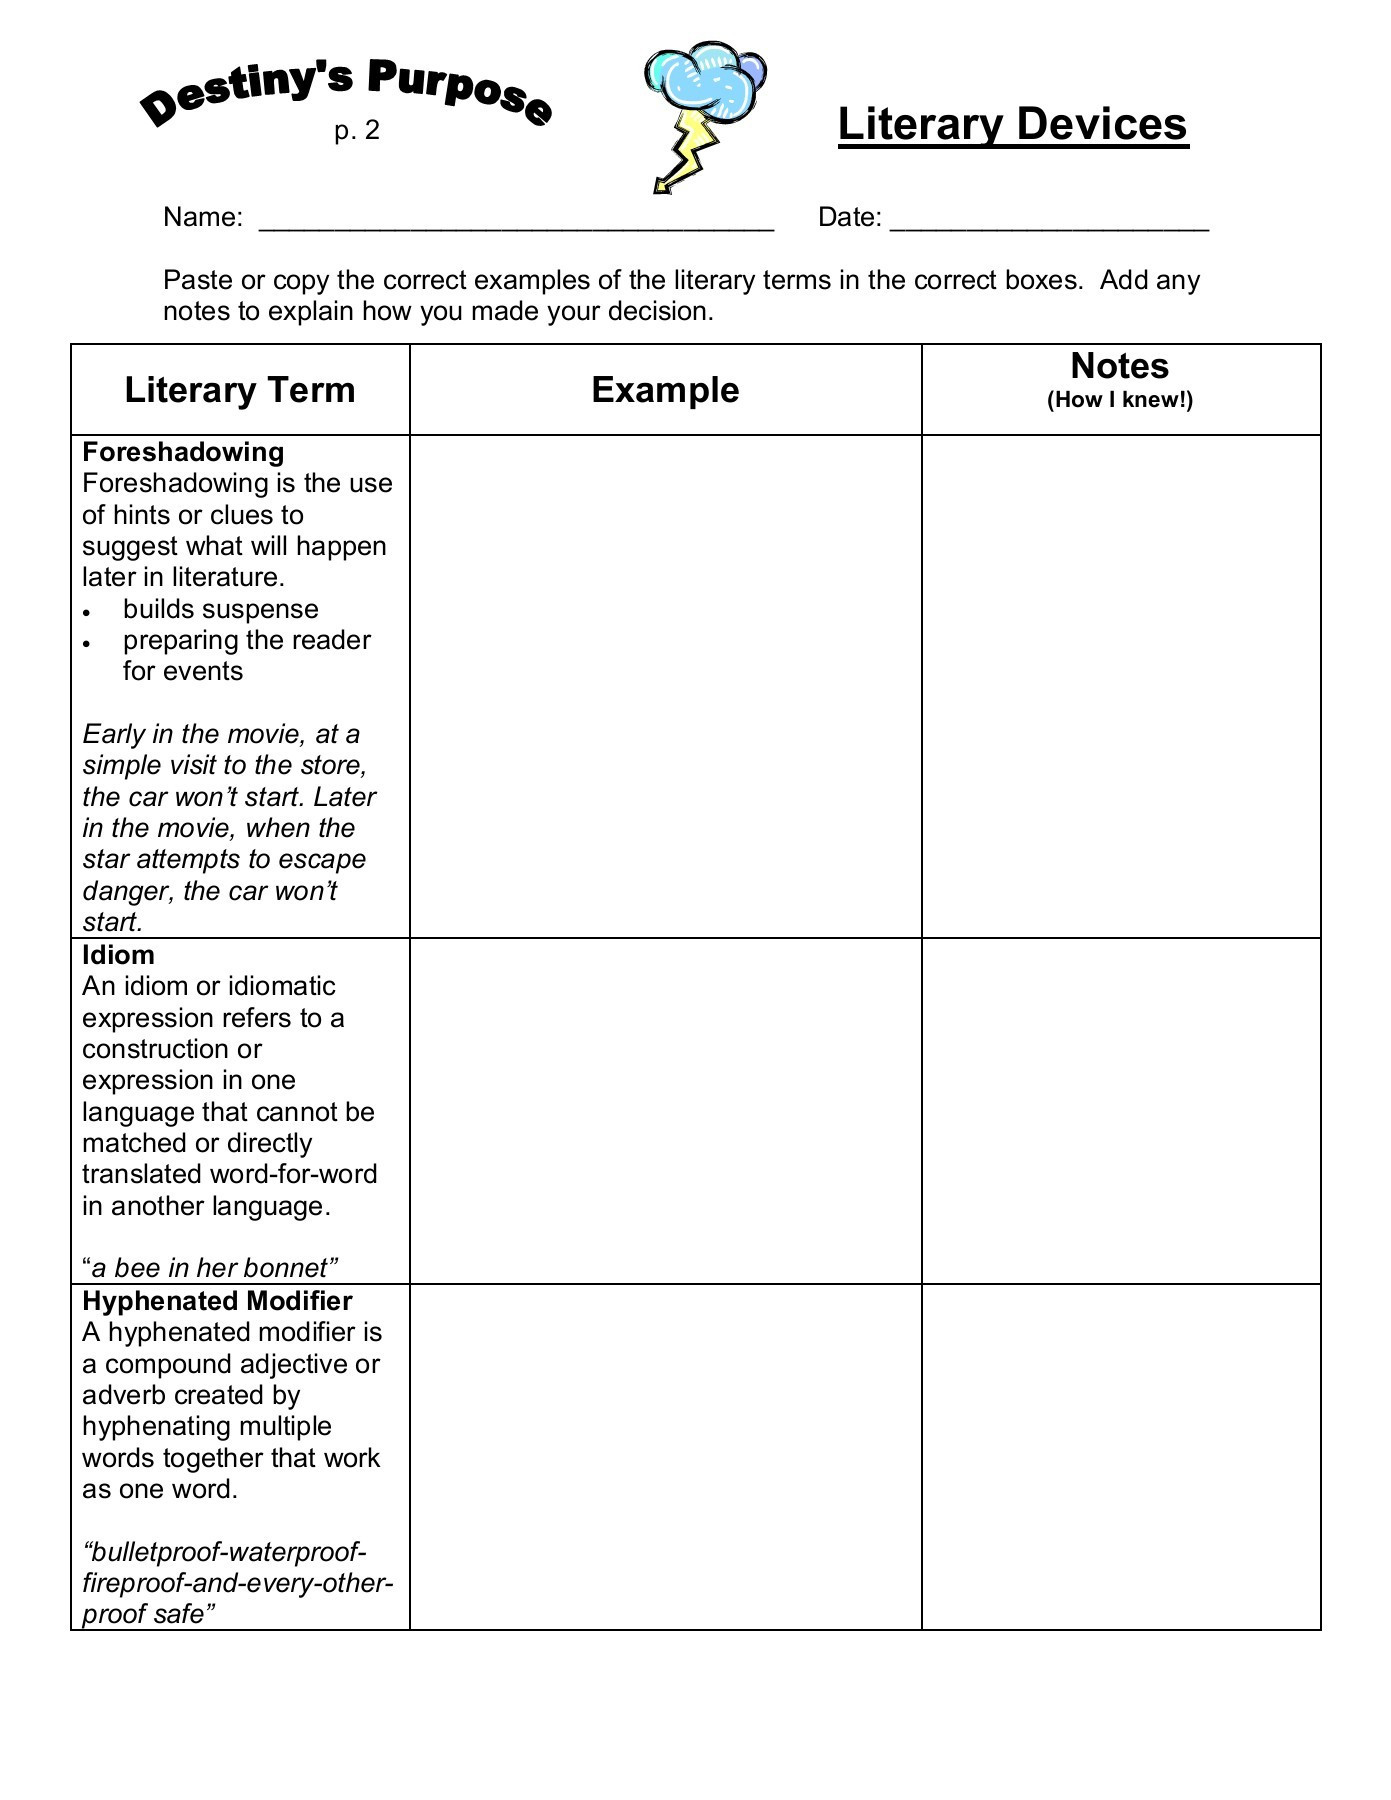 Literary Devices Worksheet Pdf Literary Devices Worksheet Pc Mac Pages 1 5 Text